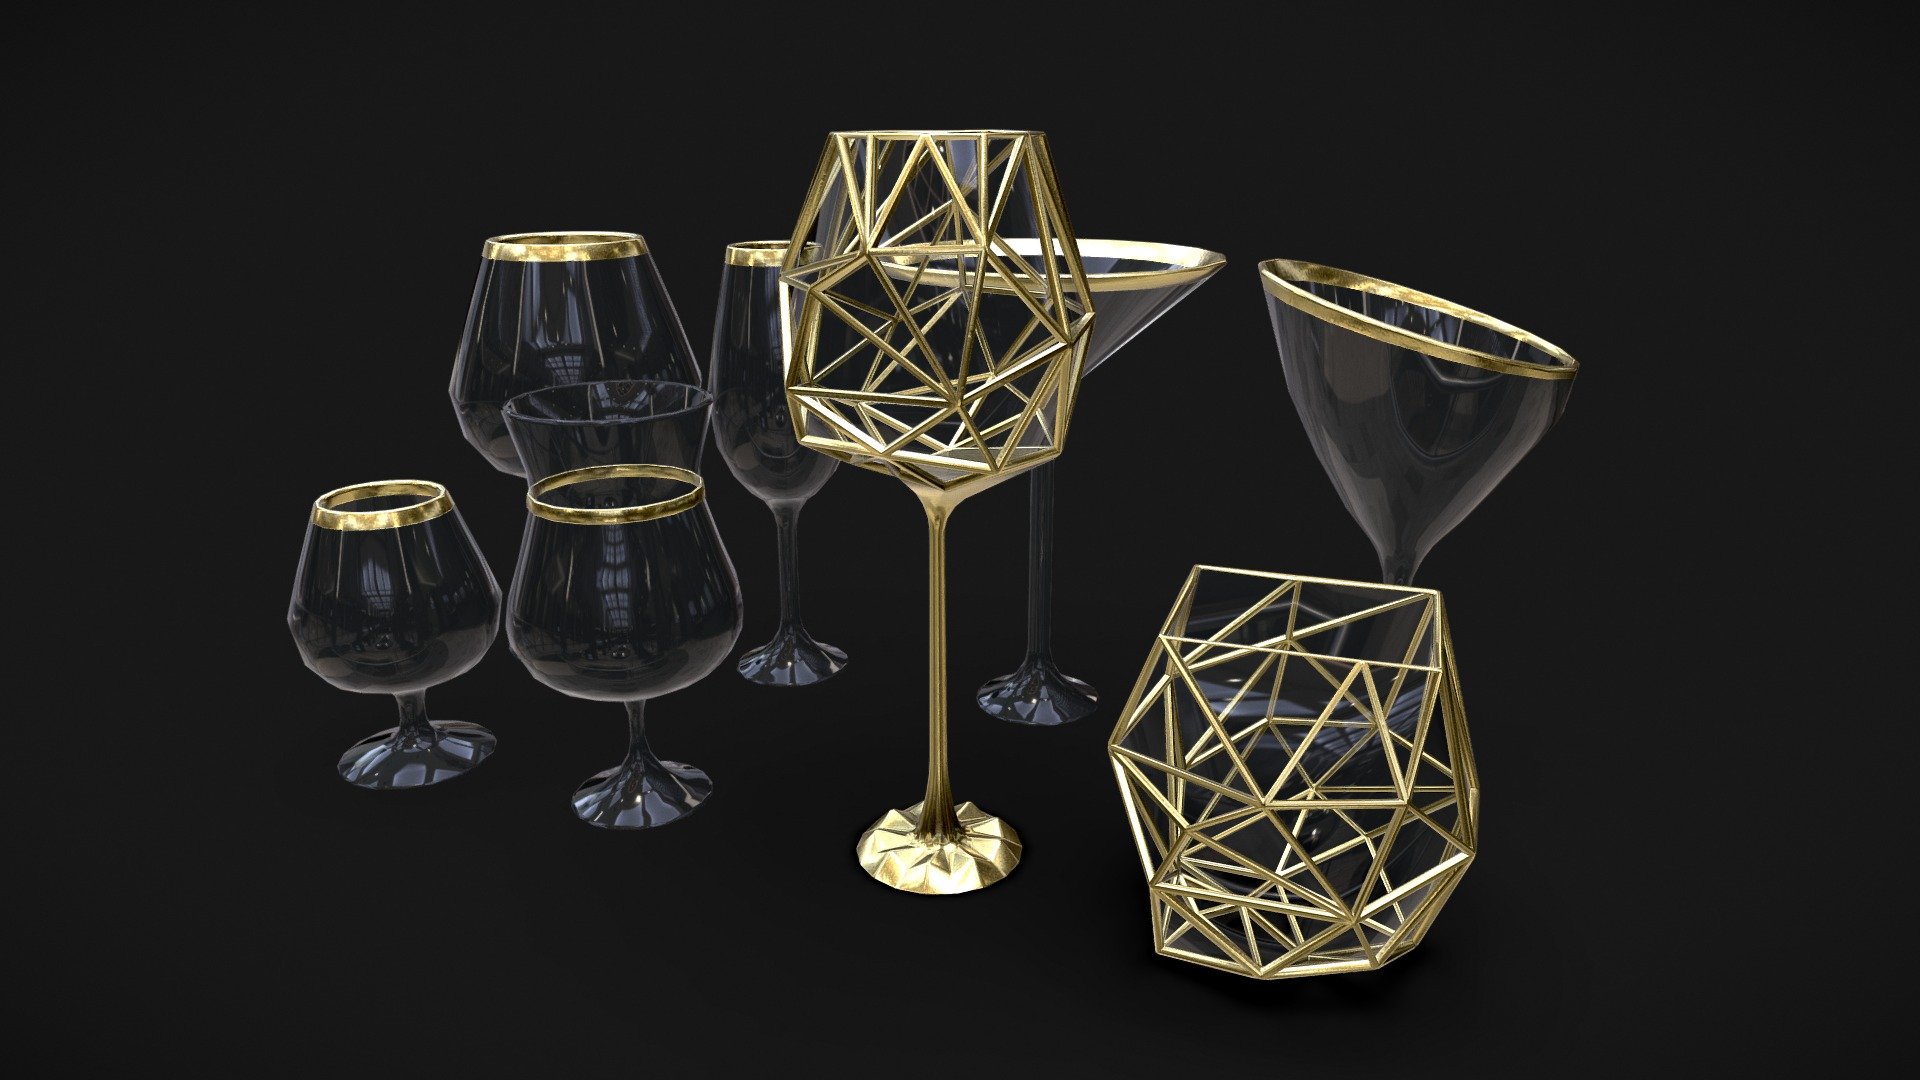 A small set of tableware, glasses for different drinks. Created for interior asset 3d model